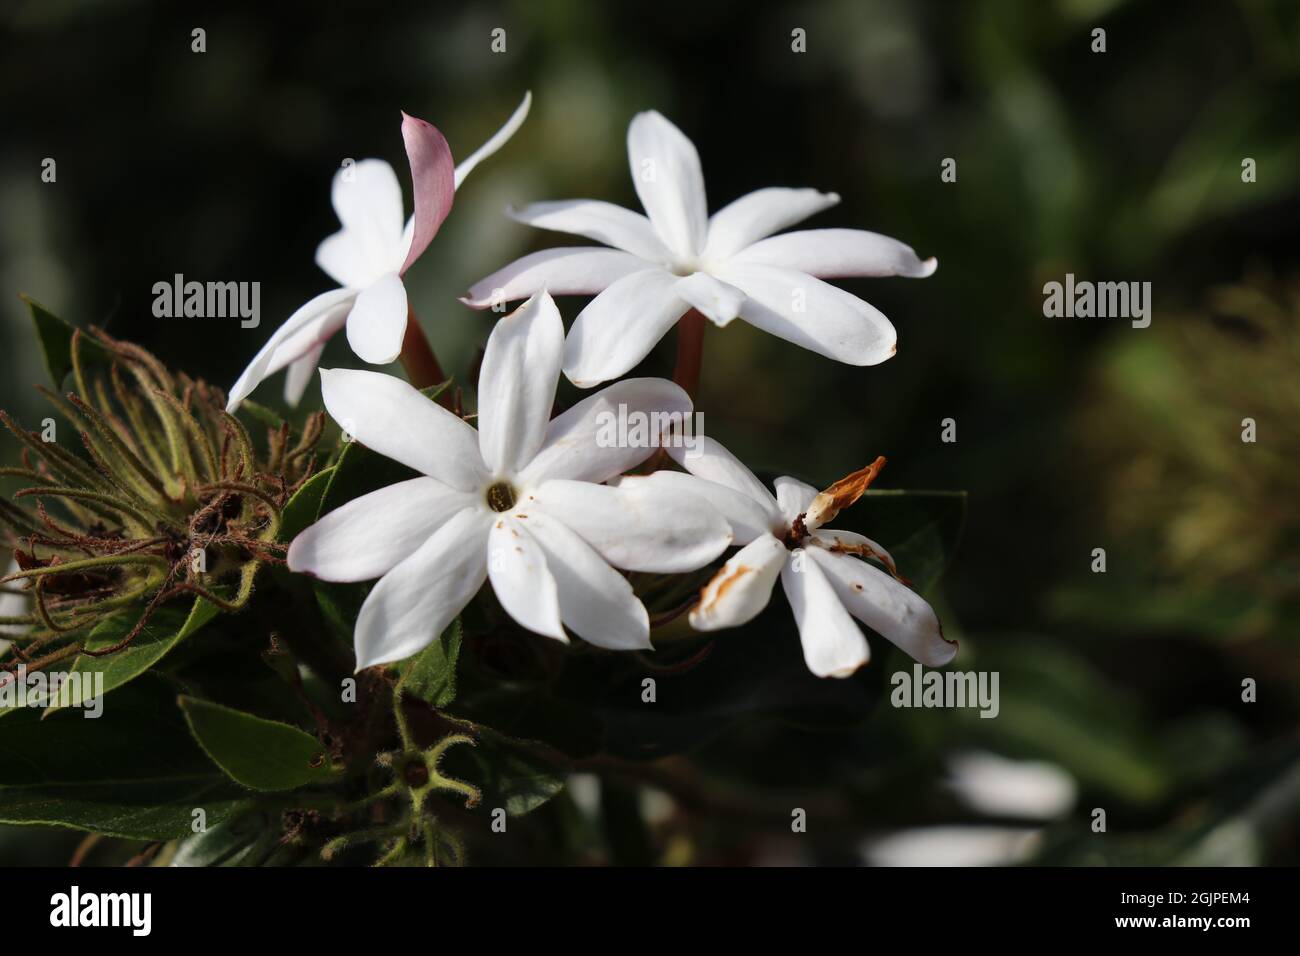 Blooming Jasmins in leafy background Stock Photo